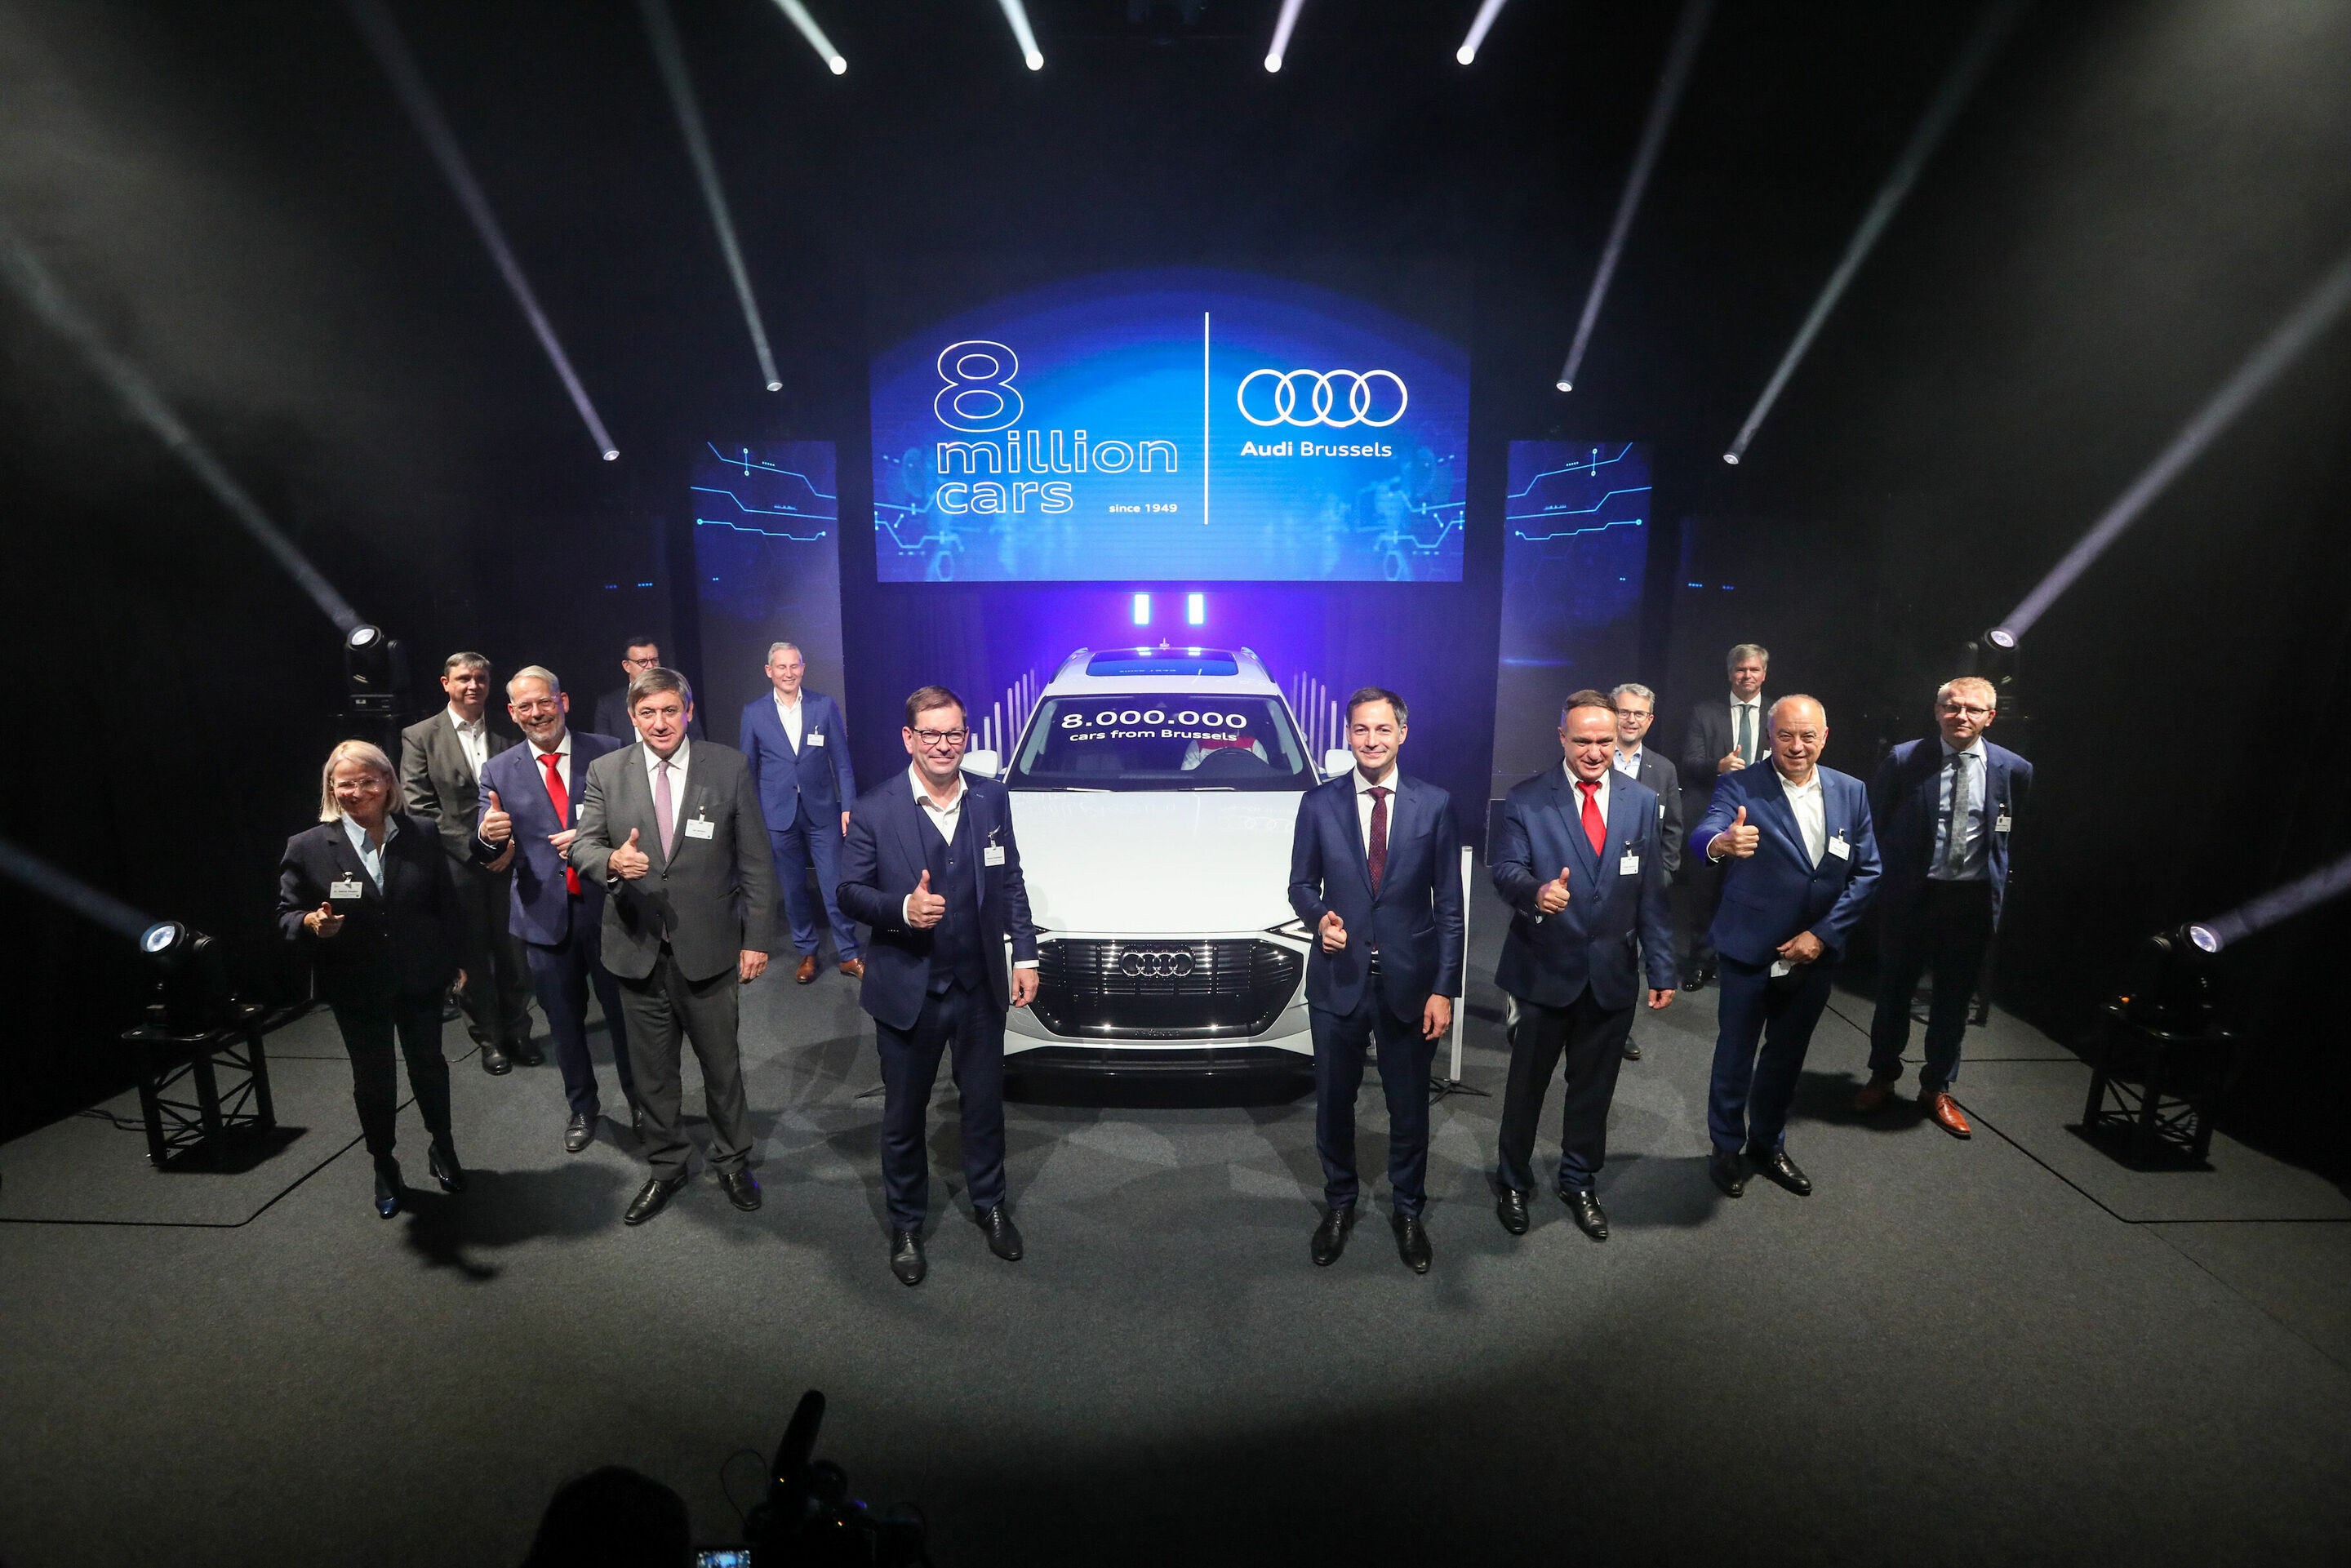 A pioneer in electric mobility and sustainability: Audi Brussels produces its eight millionth car.